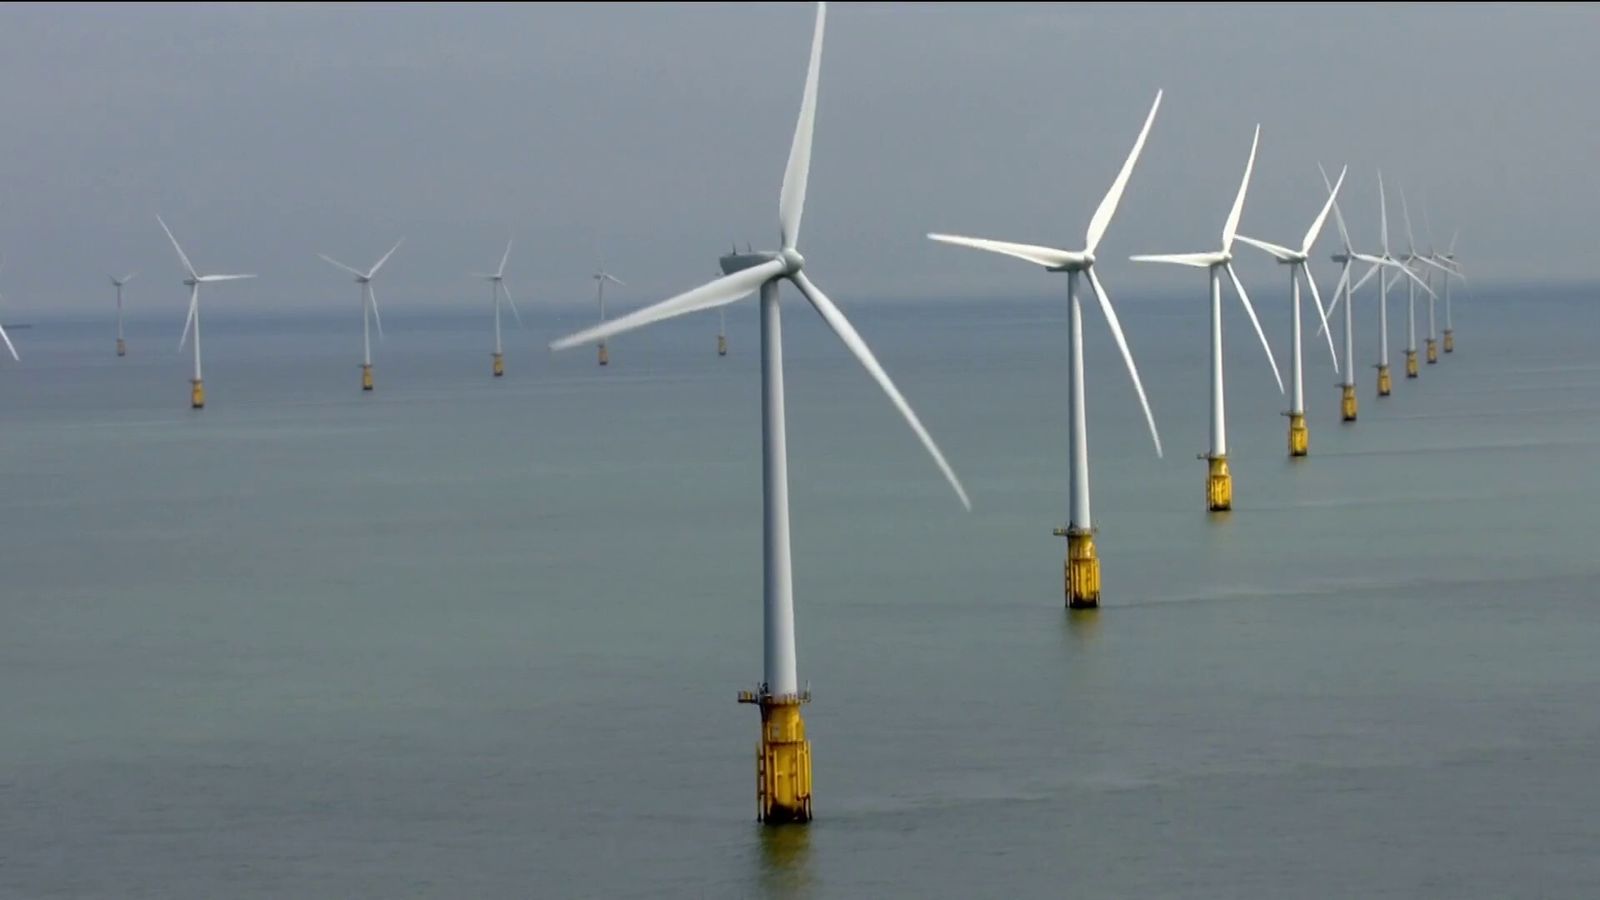 Government set to hike prices to put offshore wind auction back on track